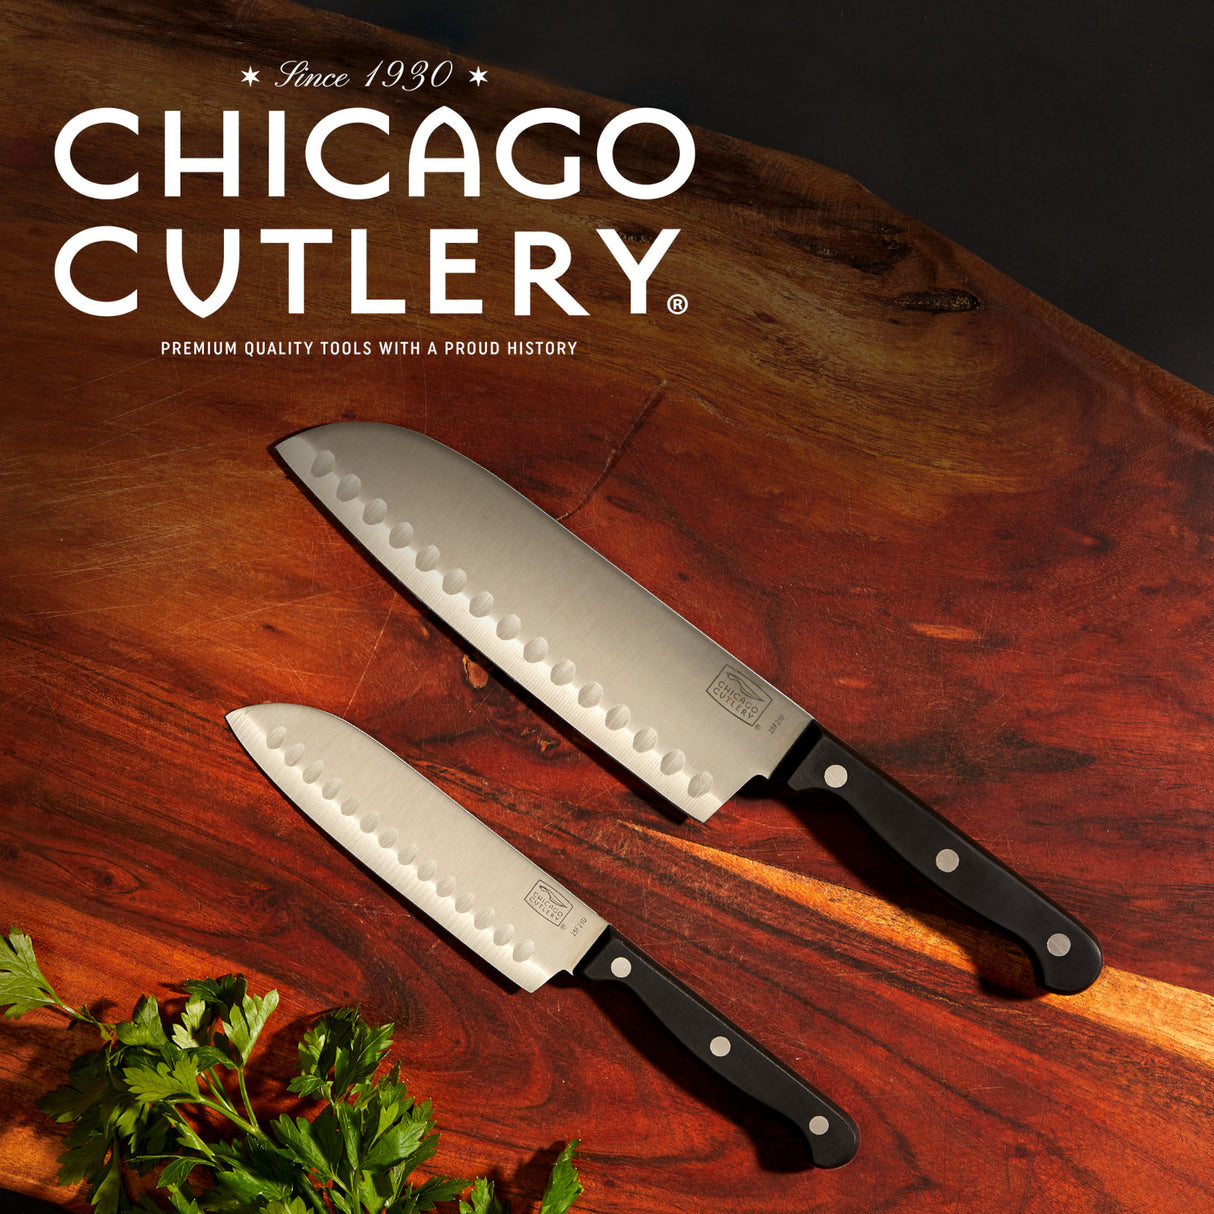 2pc Essentials Partoku/Santoku set with text Chicago Cutler premium quality tools with a proud history since 1930